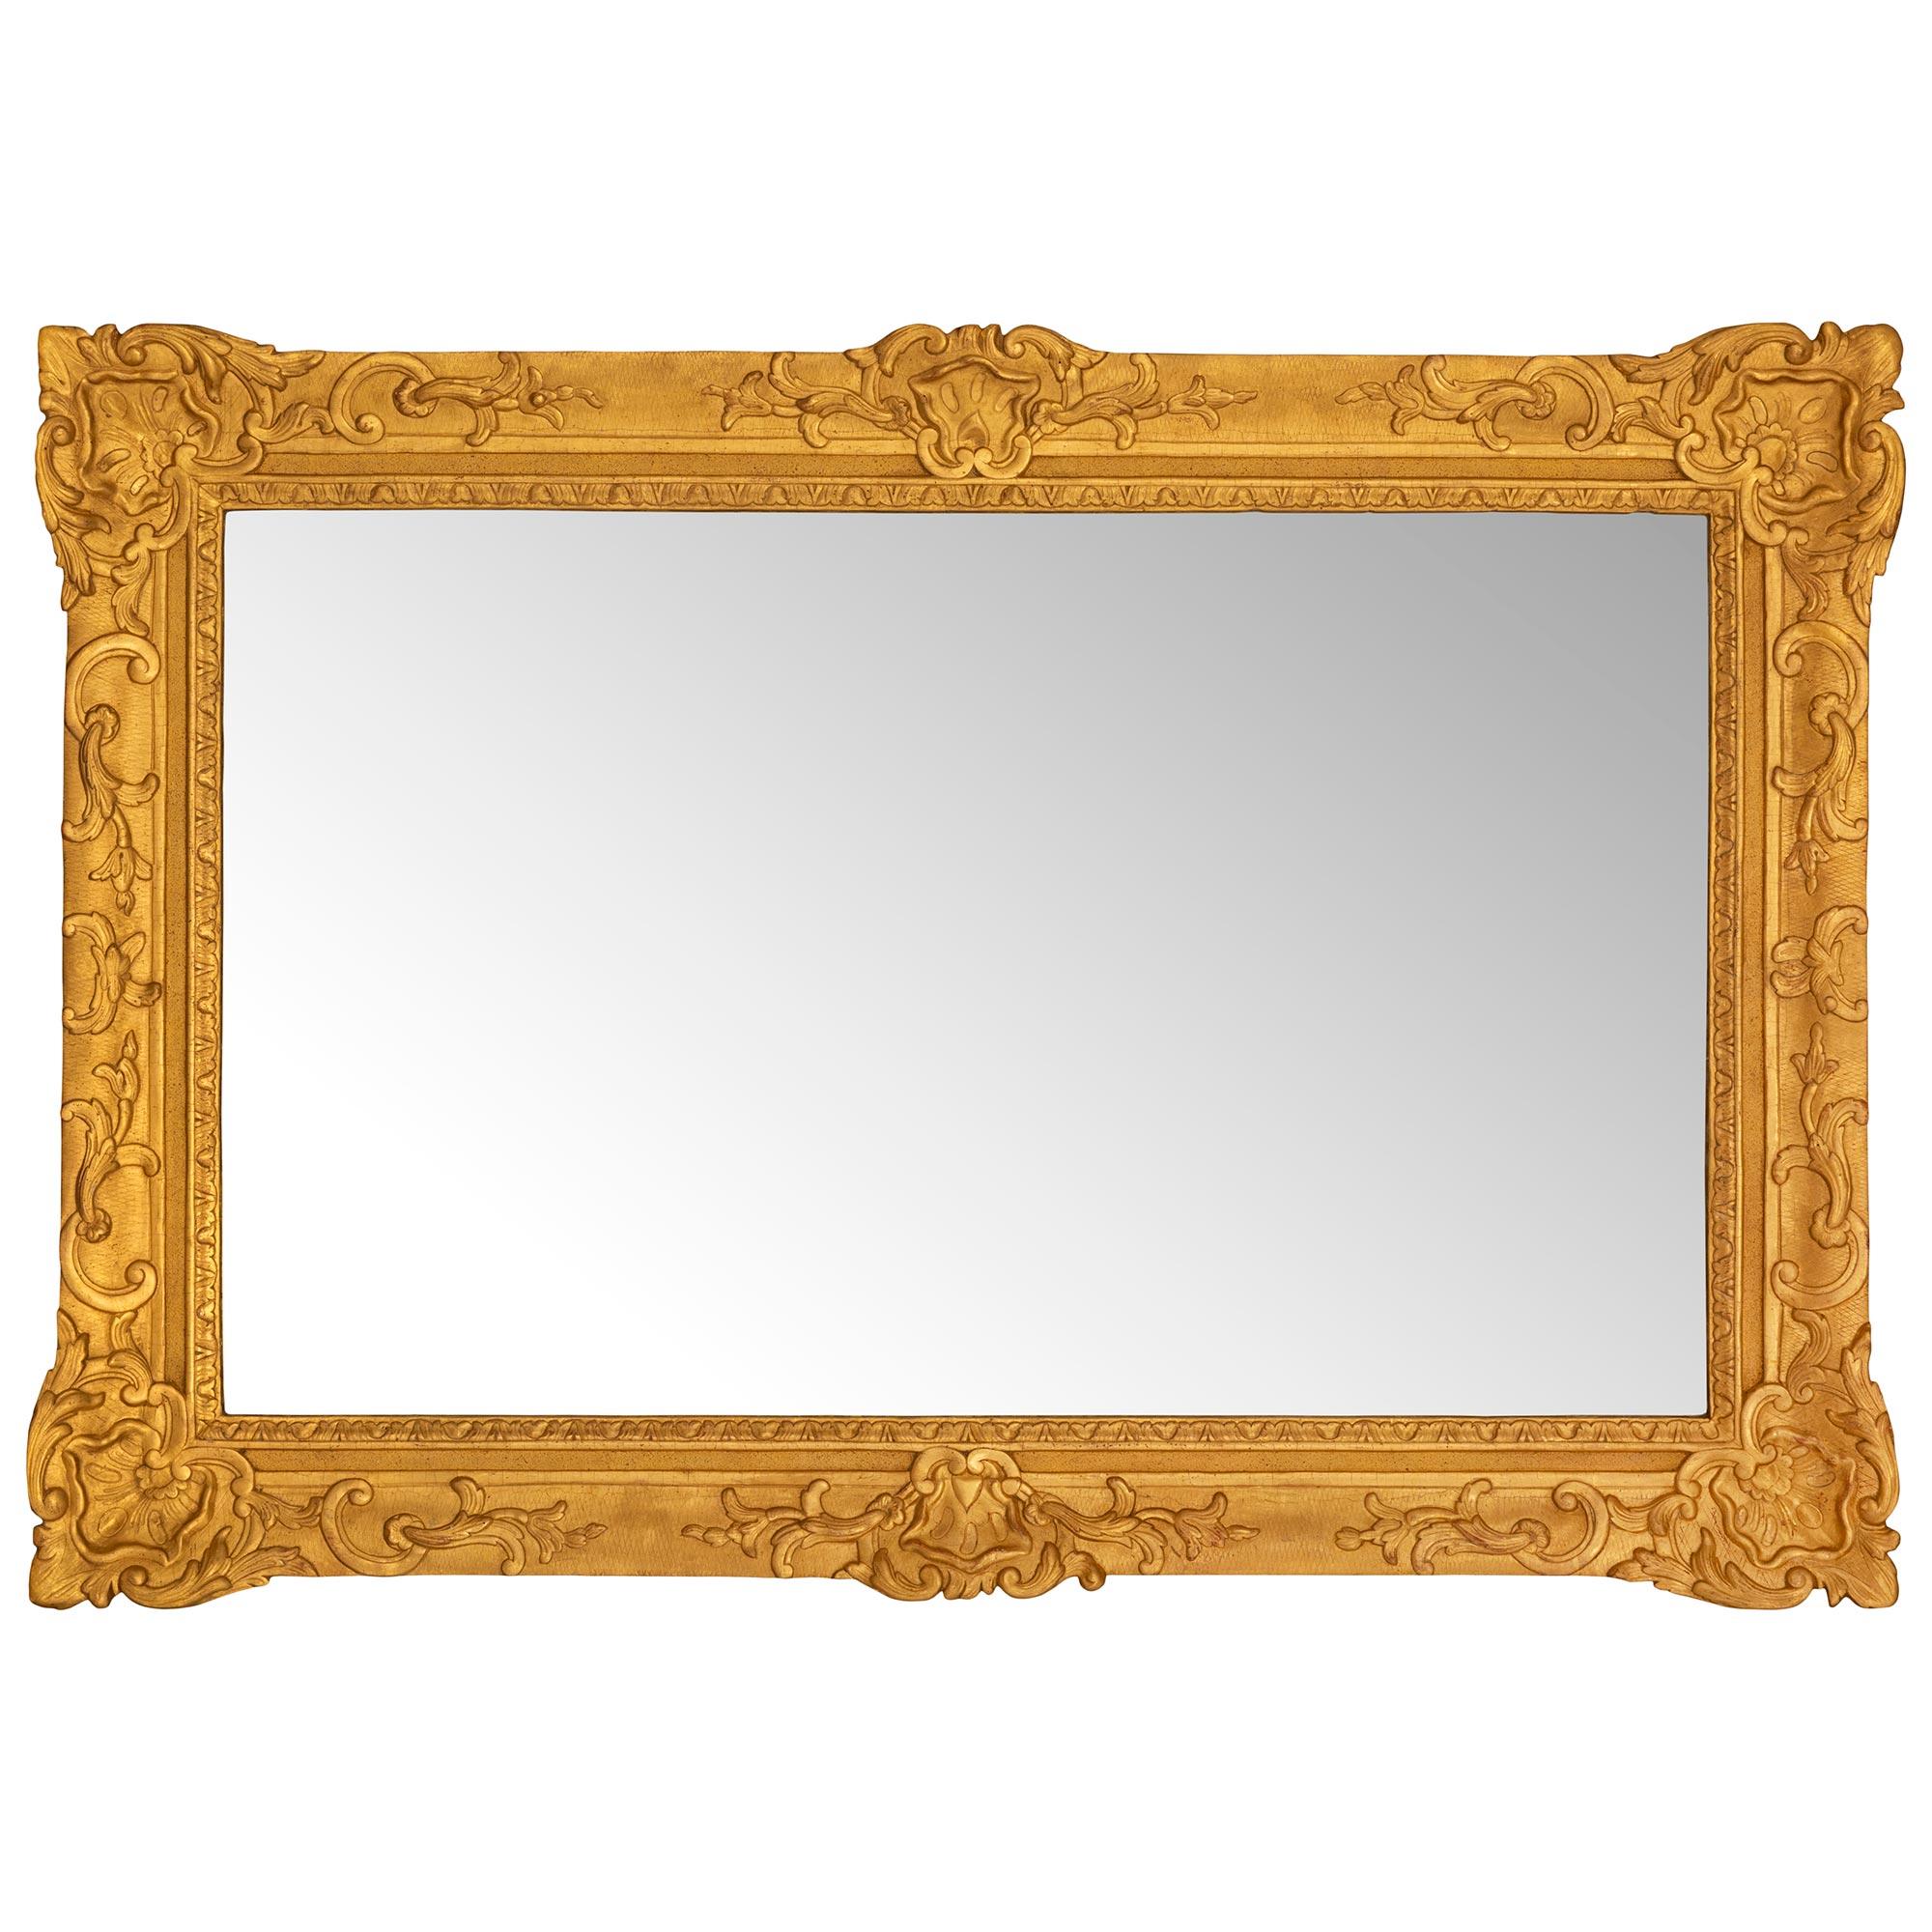 A French 18th century Regence period rectangular giltwood mirror For Sale 3